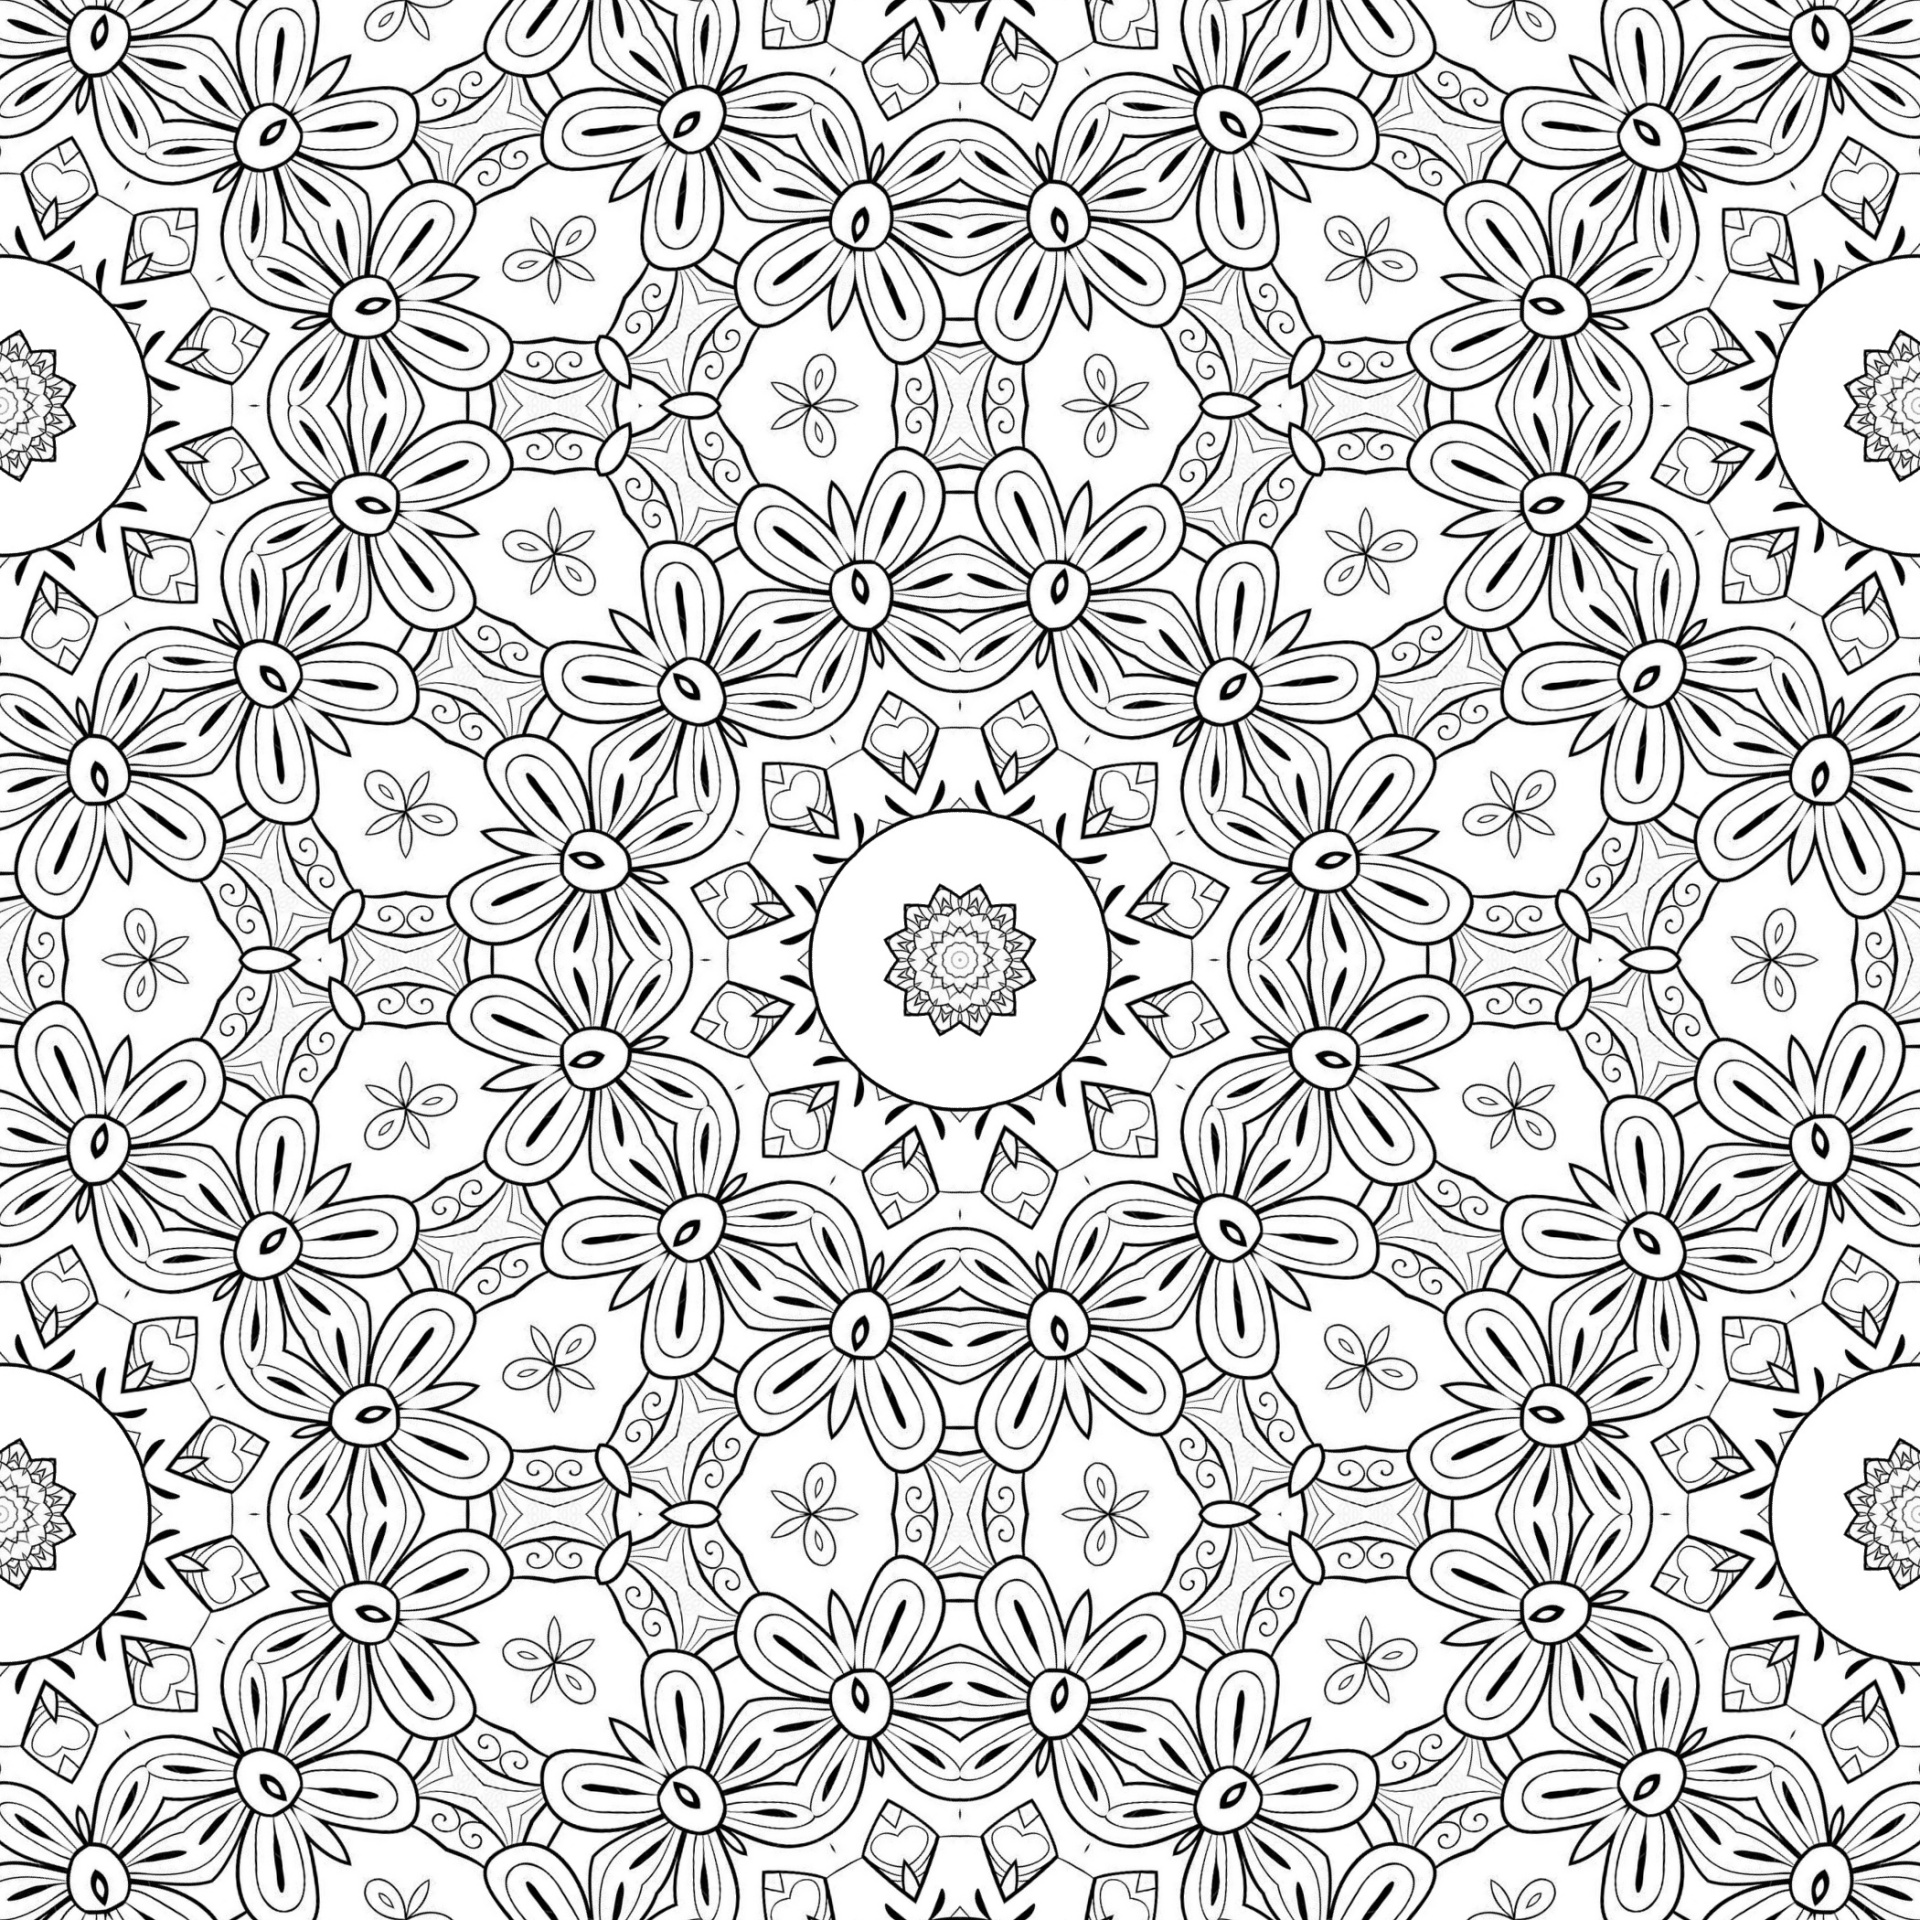 coloring-page-31-free-stock-photo-public-domain-pictures